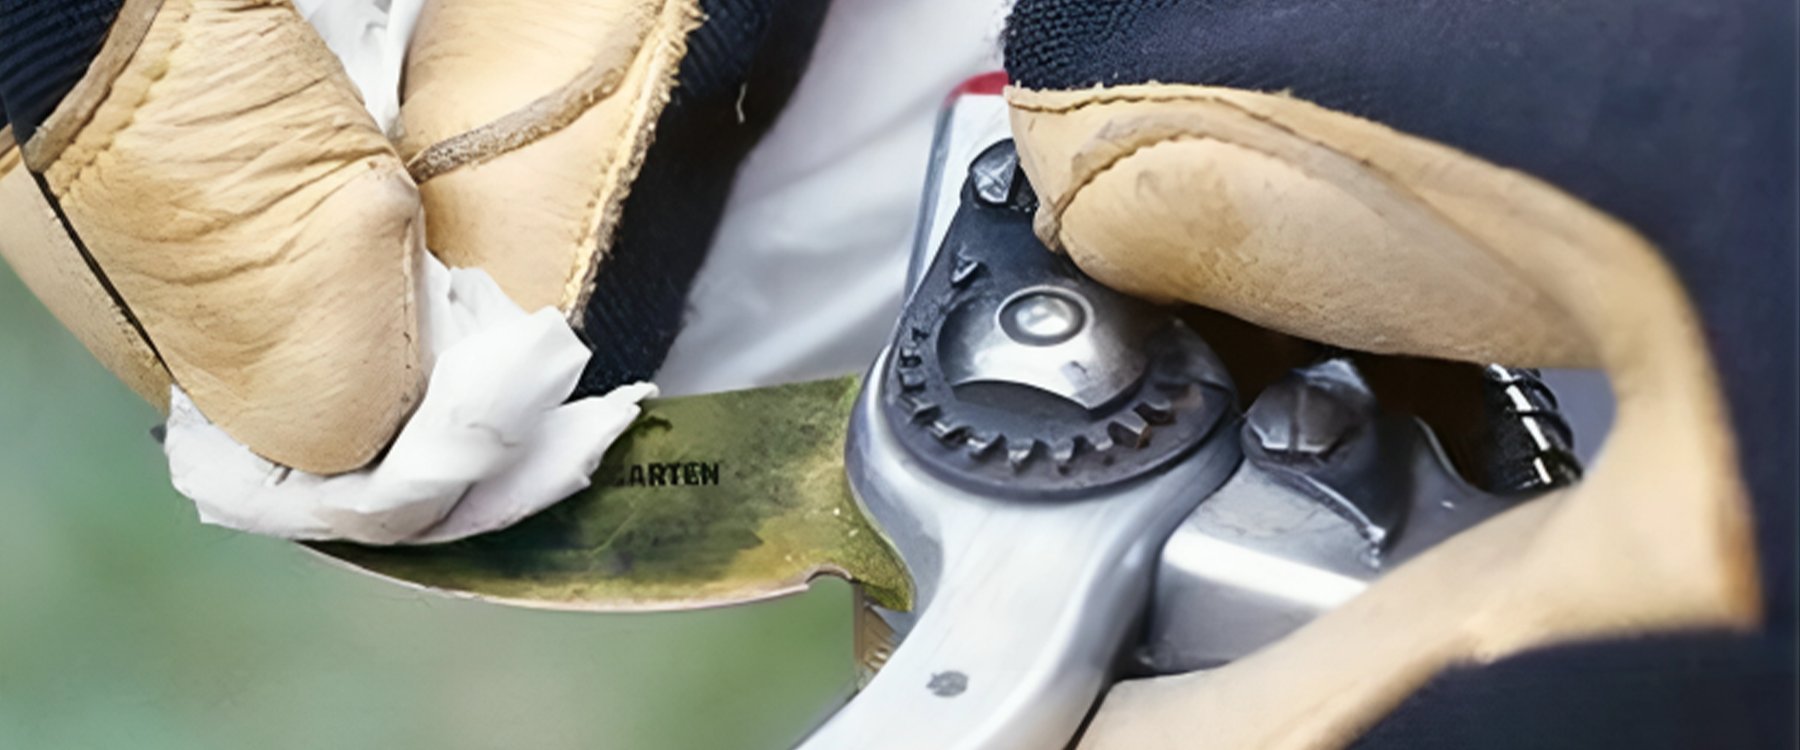 How To Care For Your Pruning Shears for Perfect Cuts Every Time